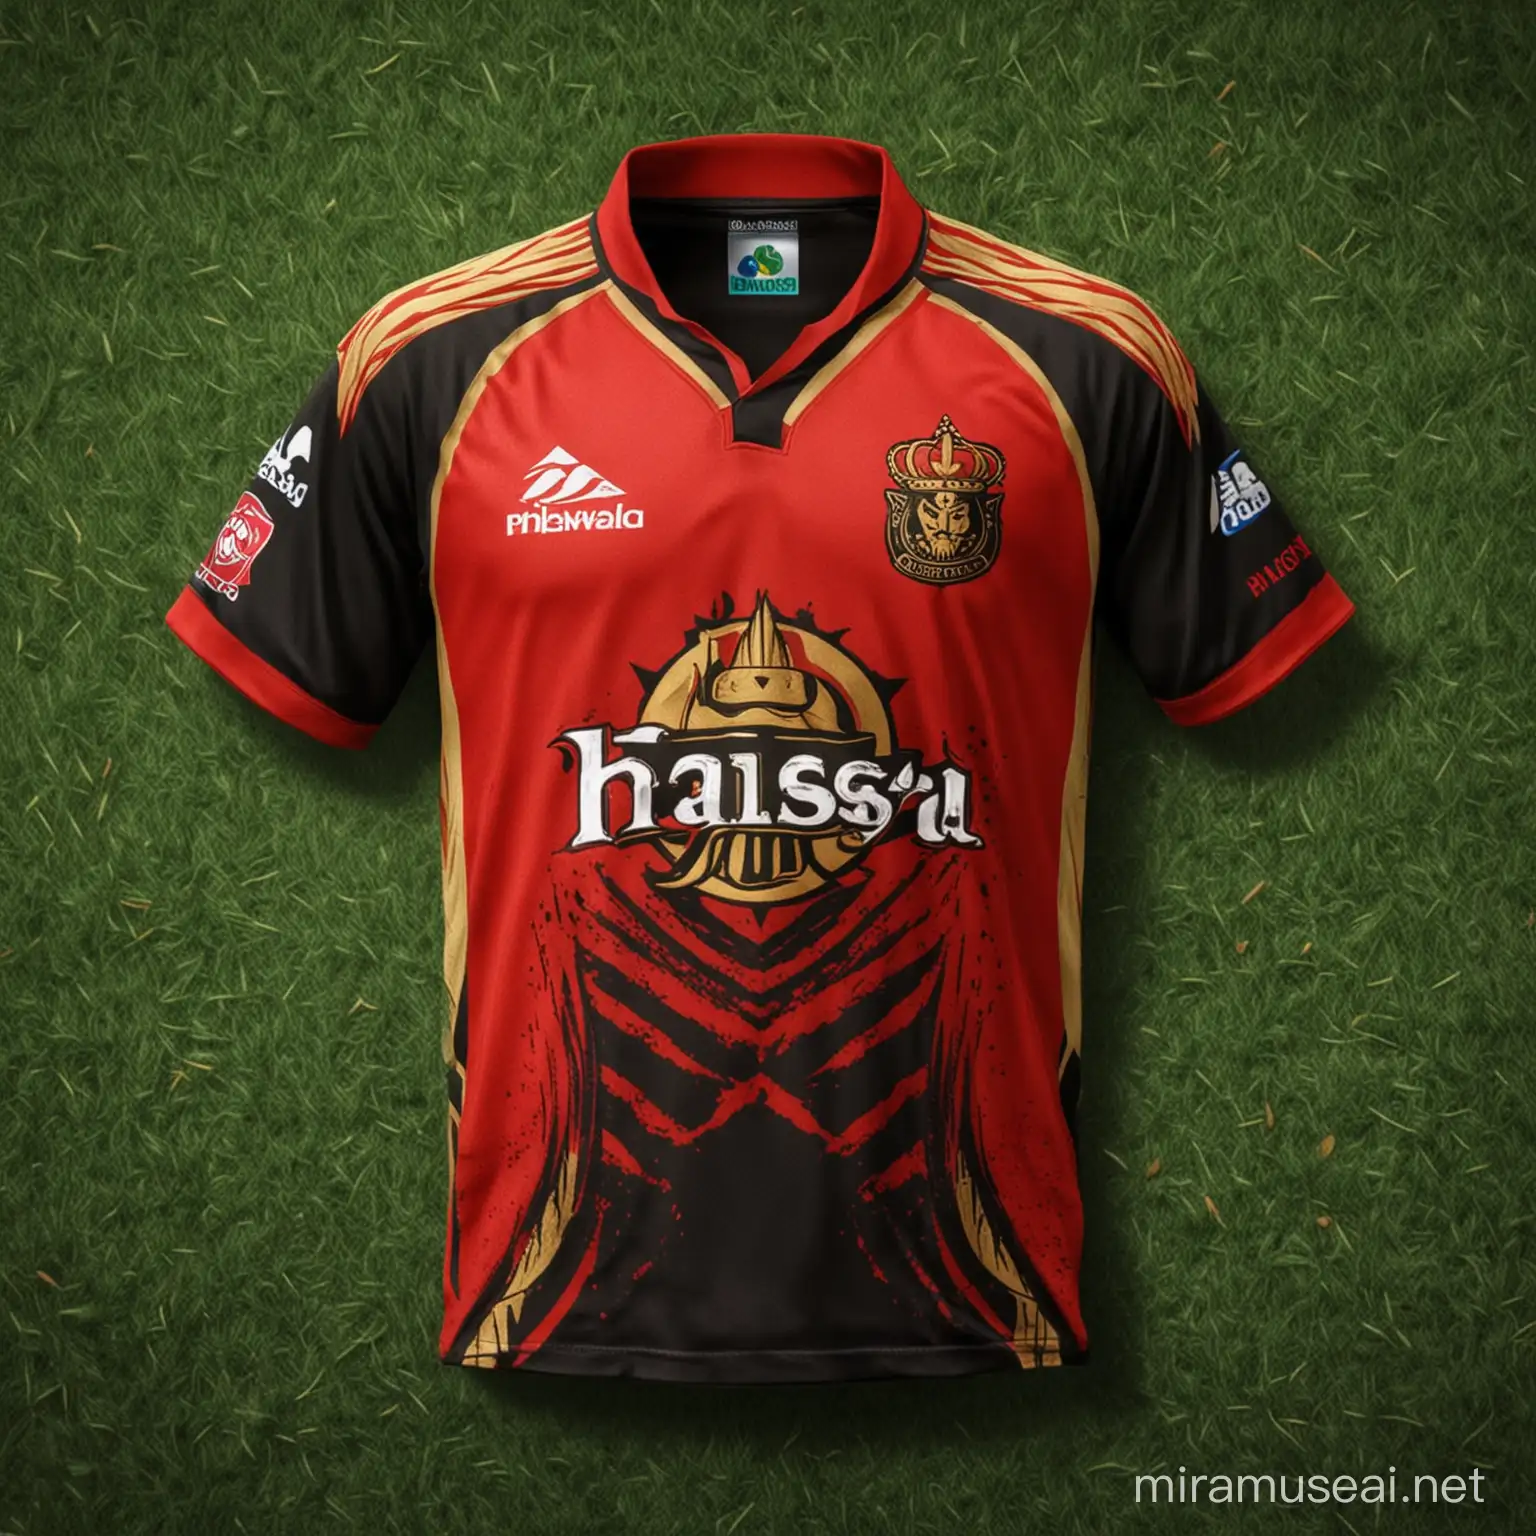 a jersey for a cricket  team named "Hoysala Hawks". Jersey shall be inspired by the Royal challengers team bangalore